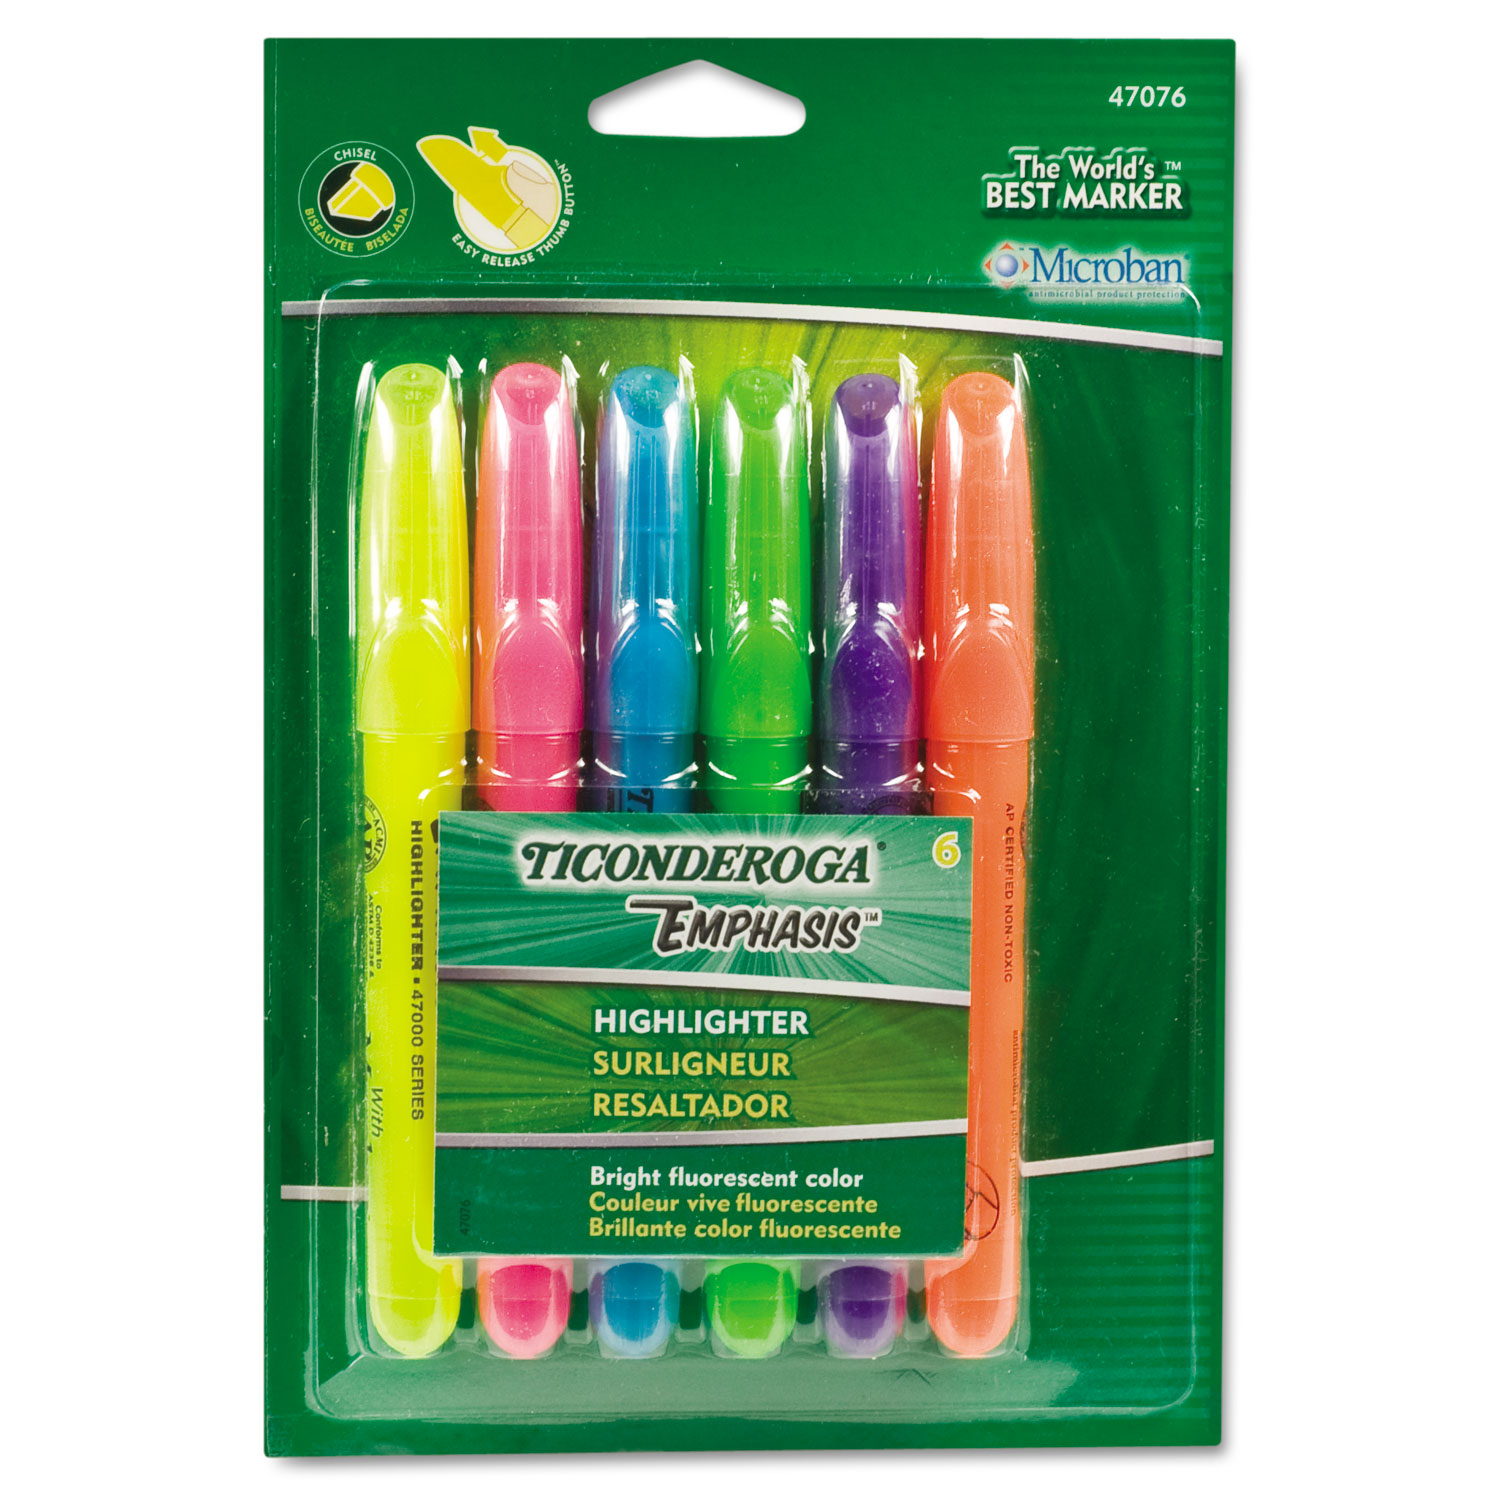  Ticonderoga 47076 Emphasis Desk Style Highlighters, Chisel Tip, Assorted Colors, 6/Set (DIX47076) 